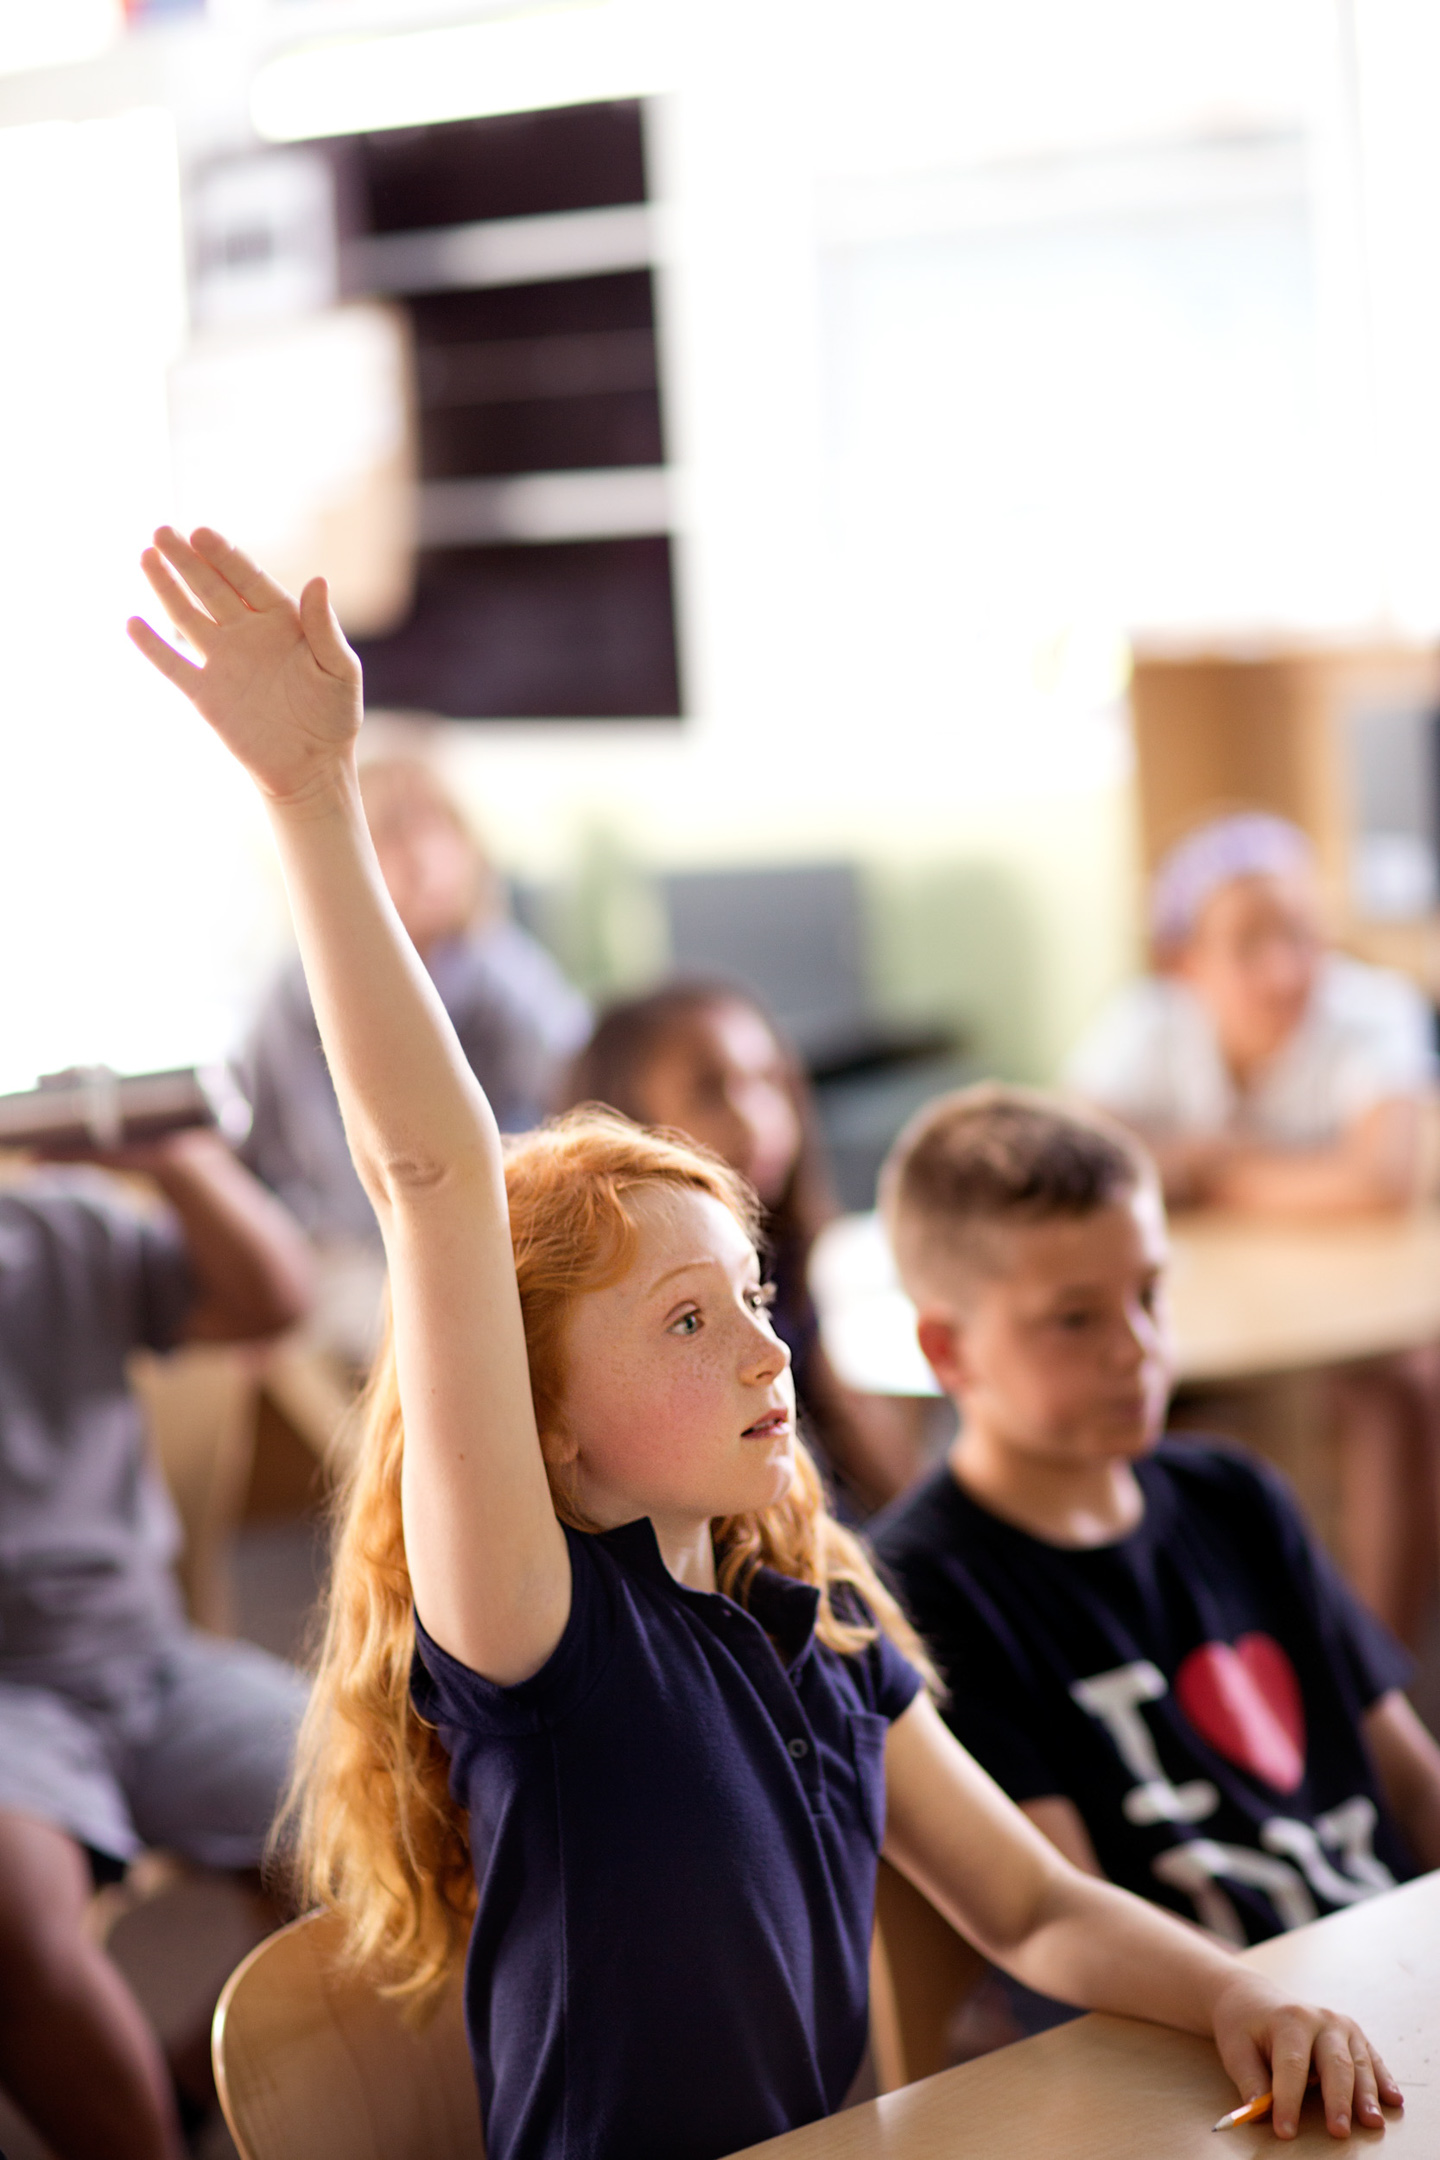 A girl raises her hand in a classroom